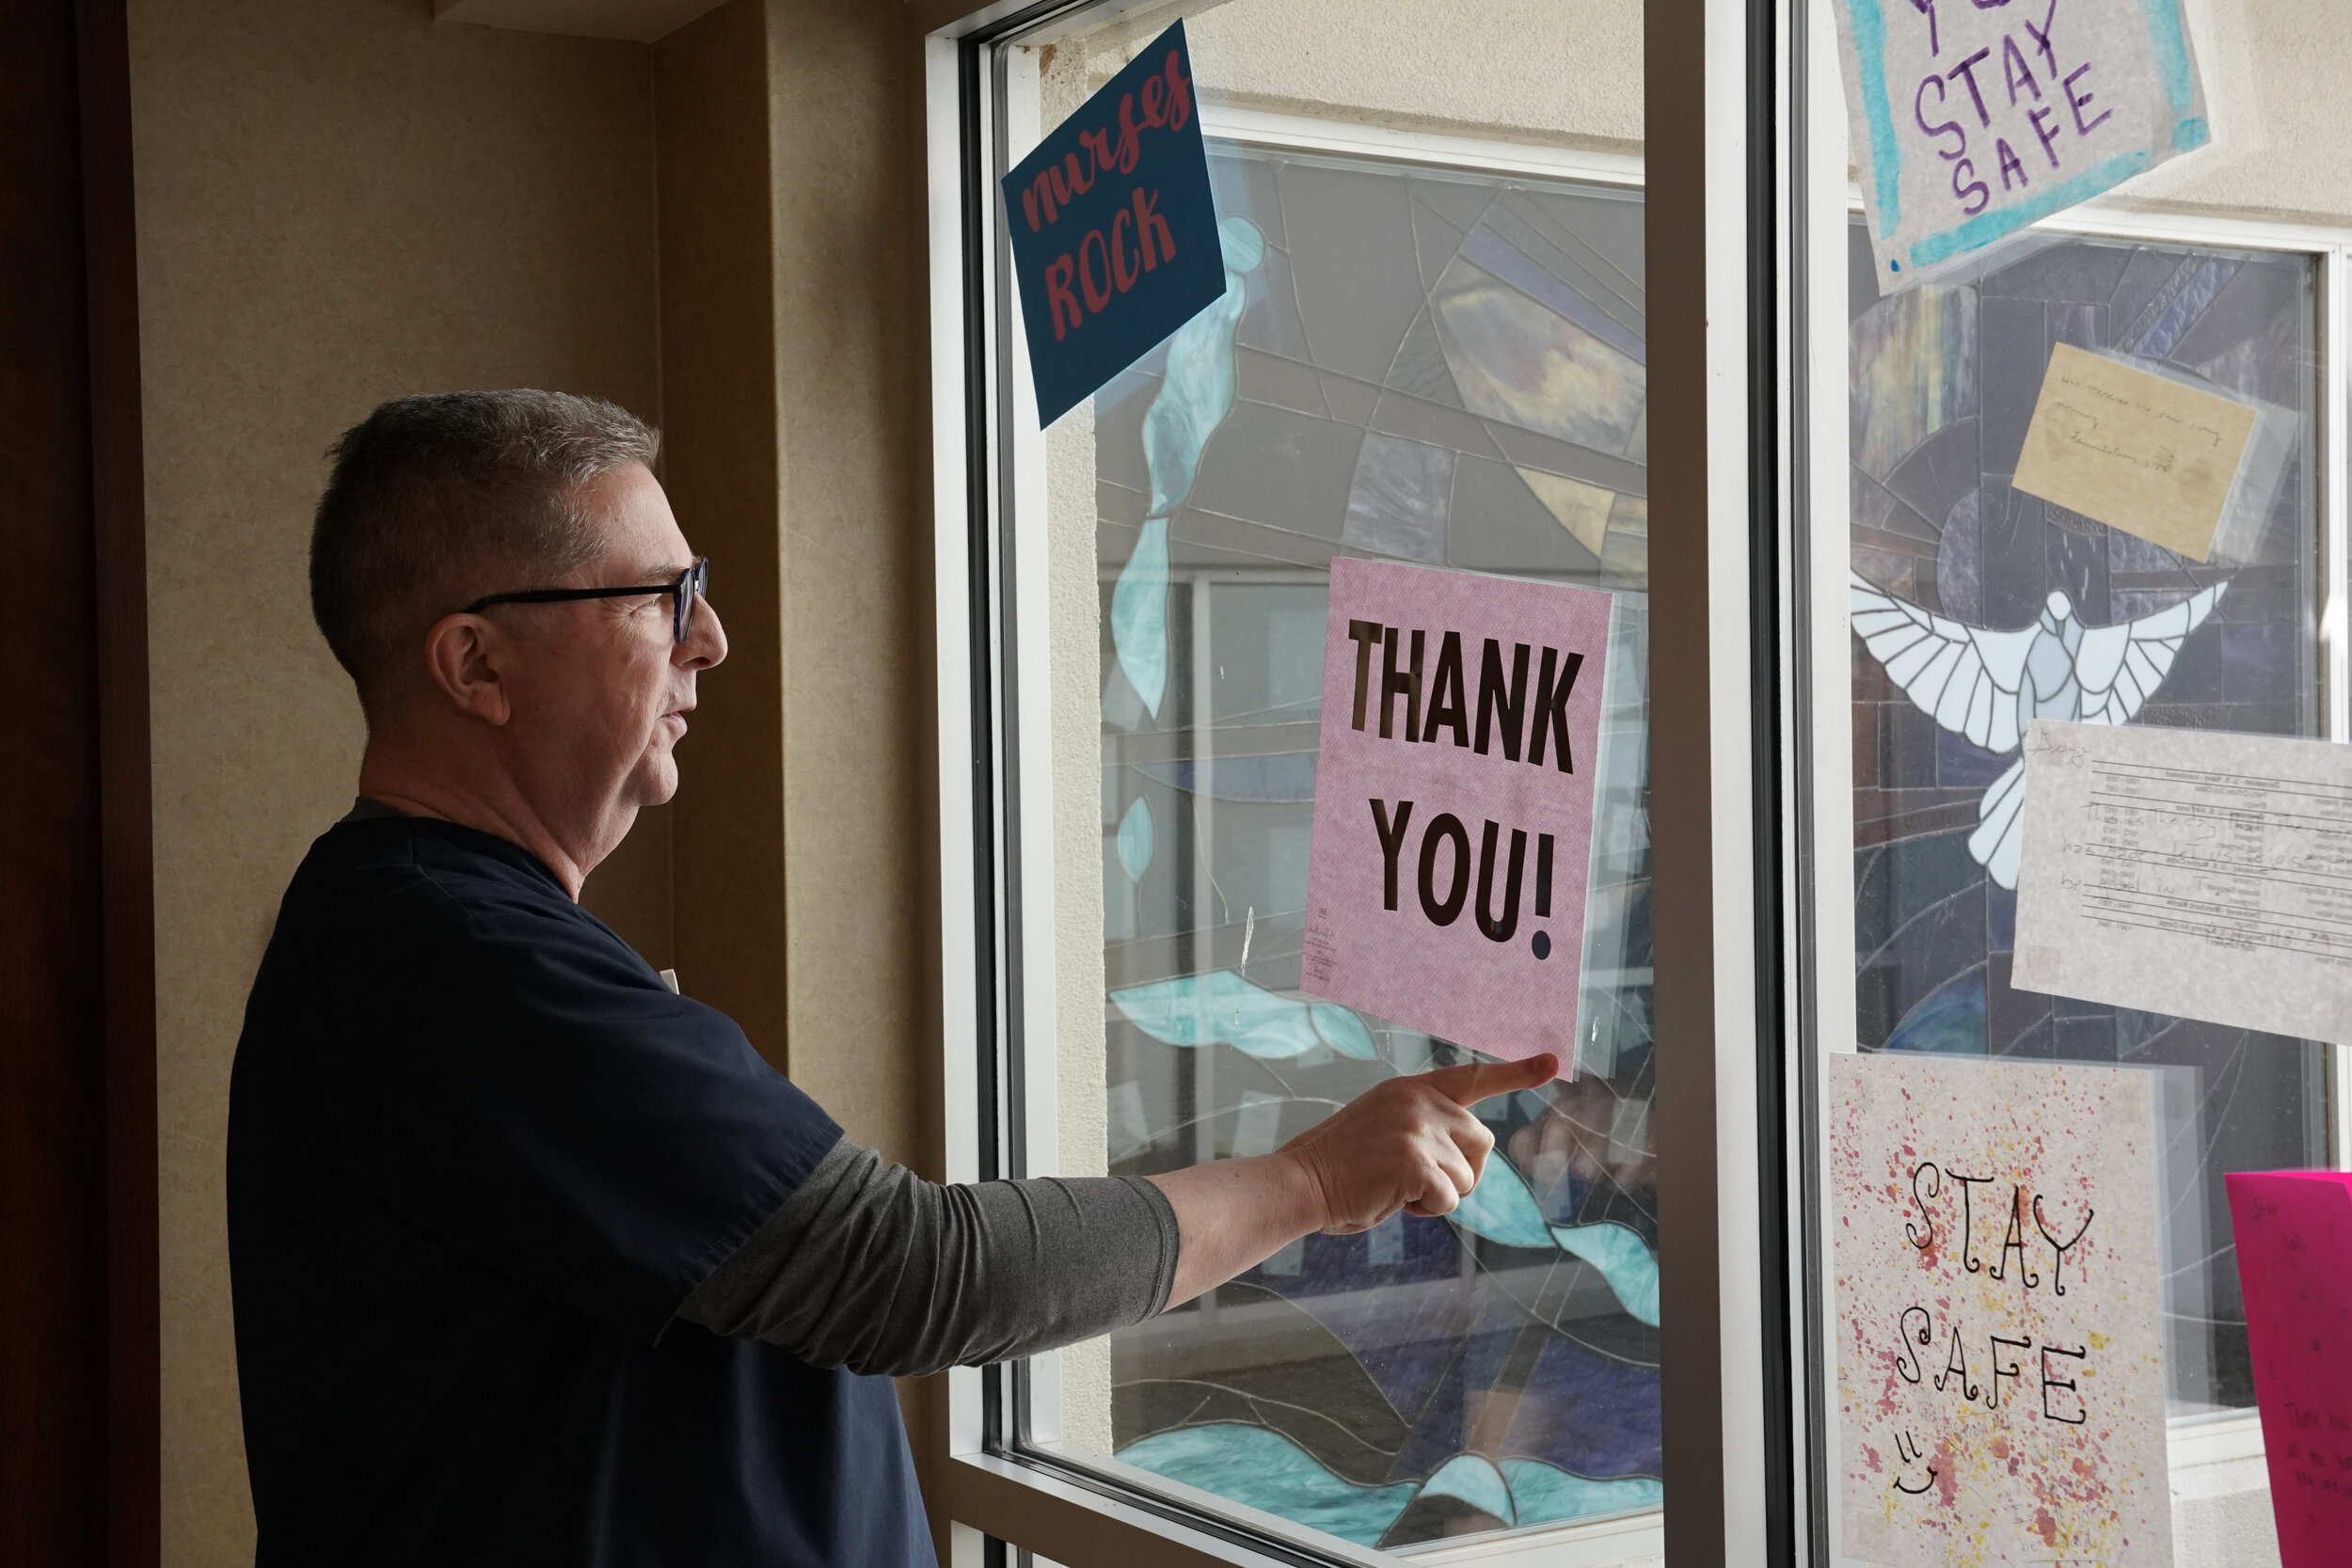  Board Certified Chaplain Bill Simpson hangs up cards of support from the community at SSM Health St. Anthony Hospital amid the spread of the coronavirus disease (COVID-19), in Shawnee, Oklahoma, U.S. April 23, 2020. REUTERS/Nick Oxford 